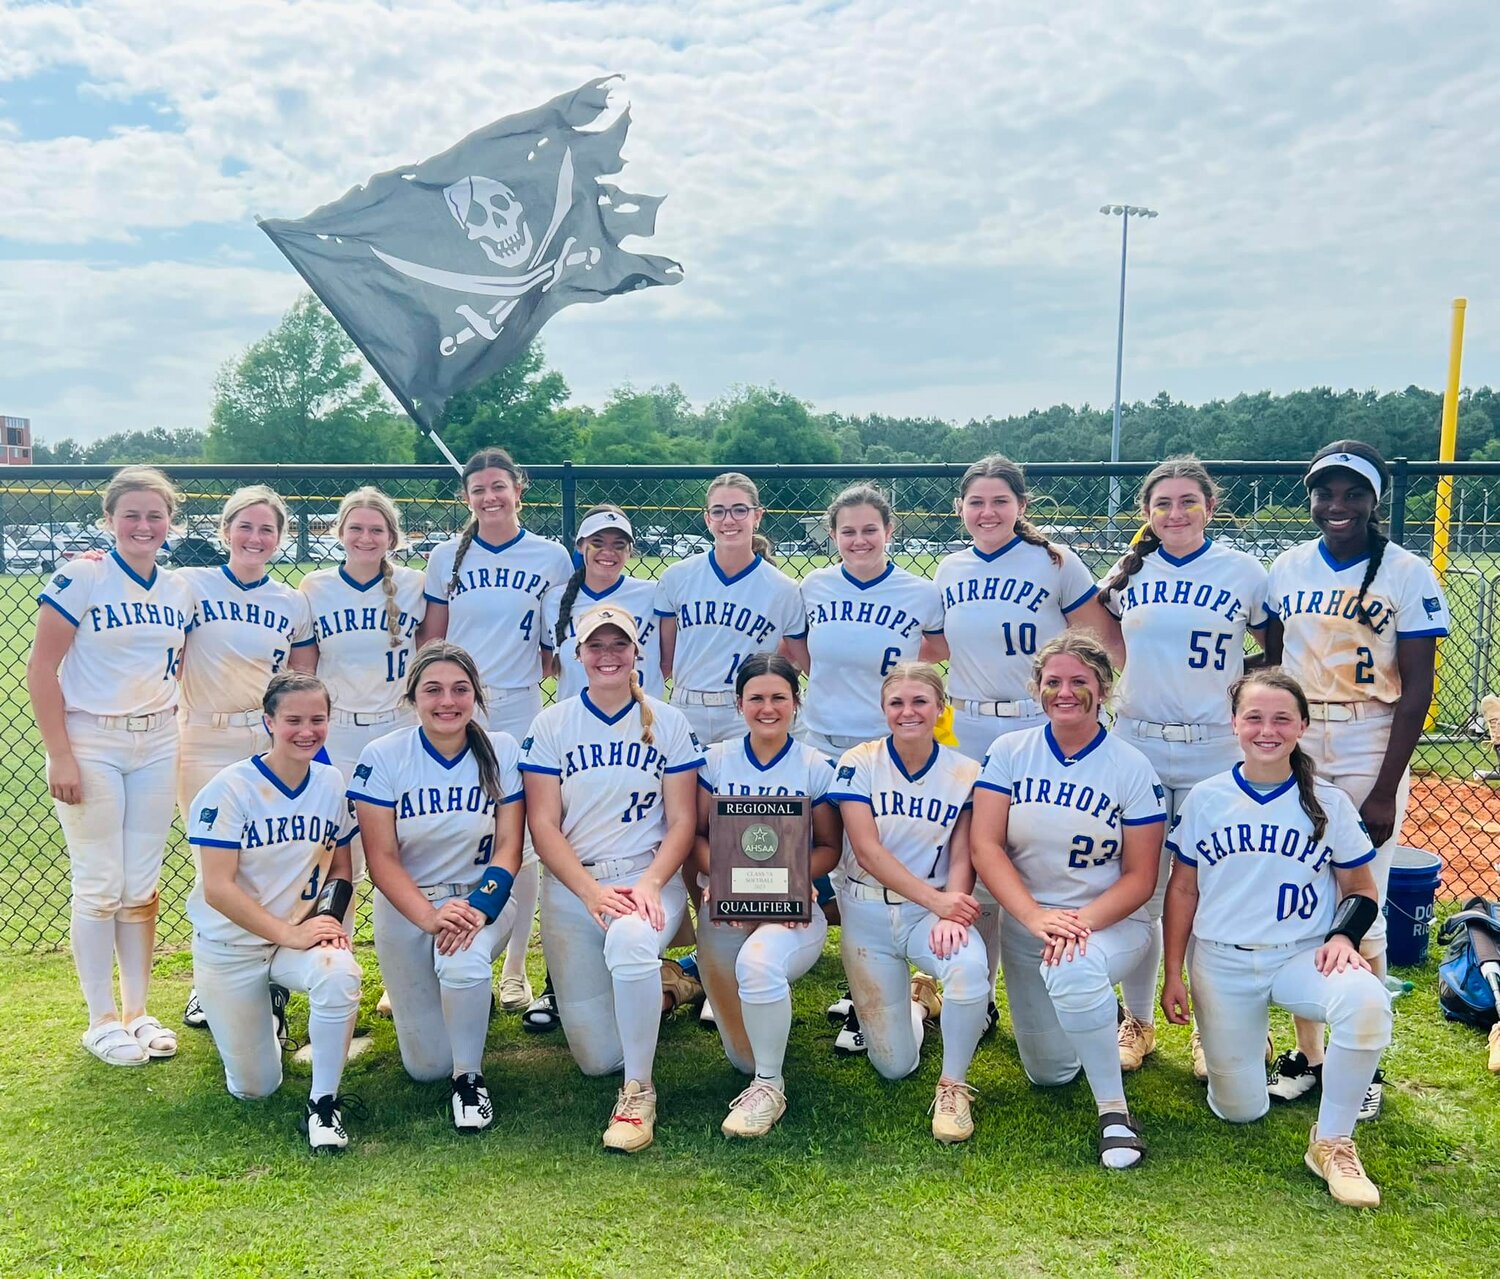 The Fairhope Pirates celebrate their Class 7A South Regional championship in Gulf Shores last weekend. Fairhope advances to the state tournament this weekend with a first-round contest set for Friday.